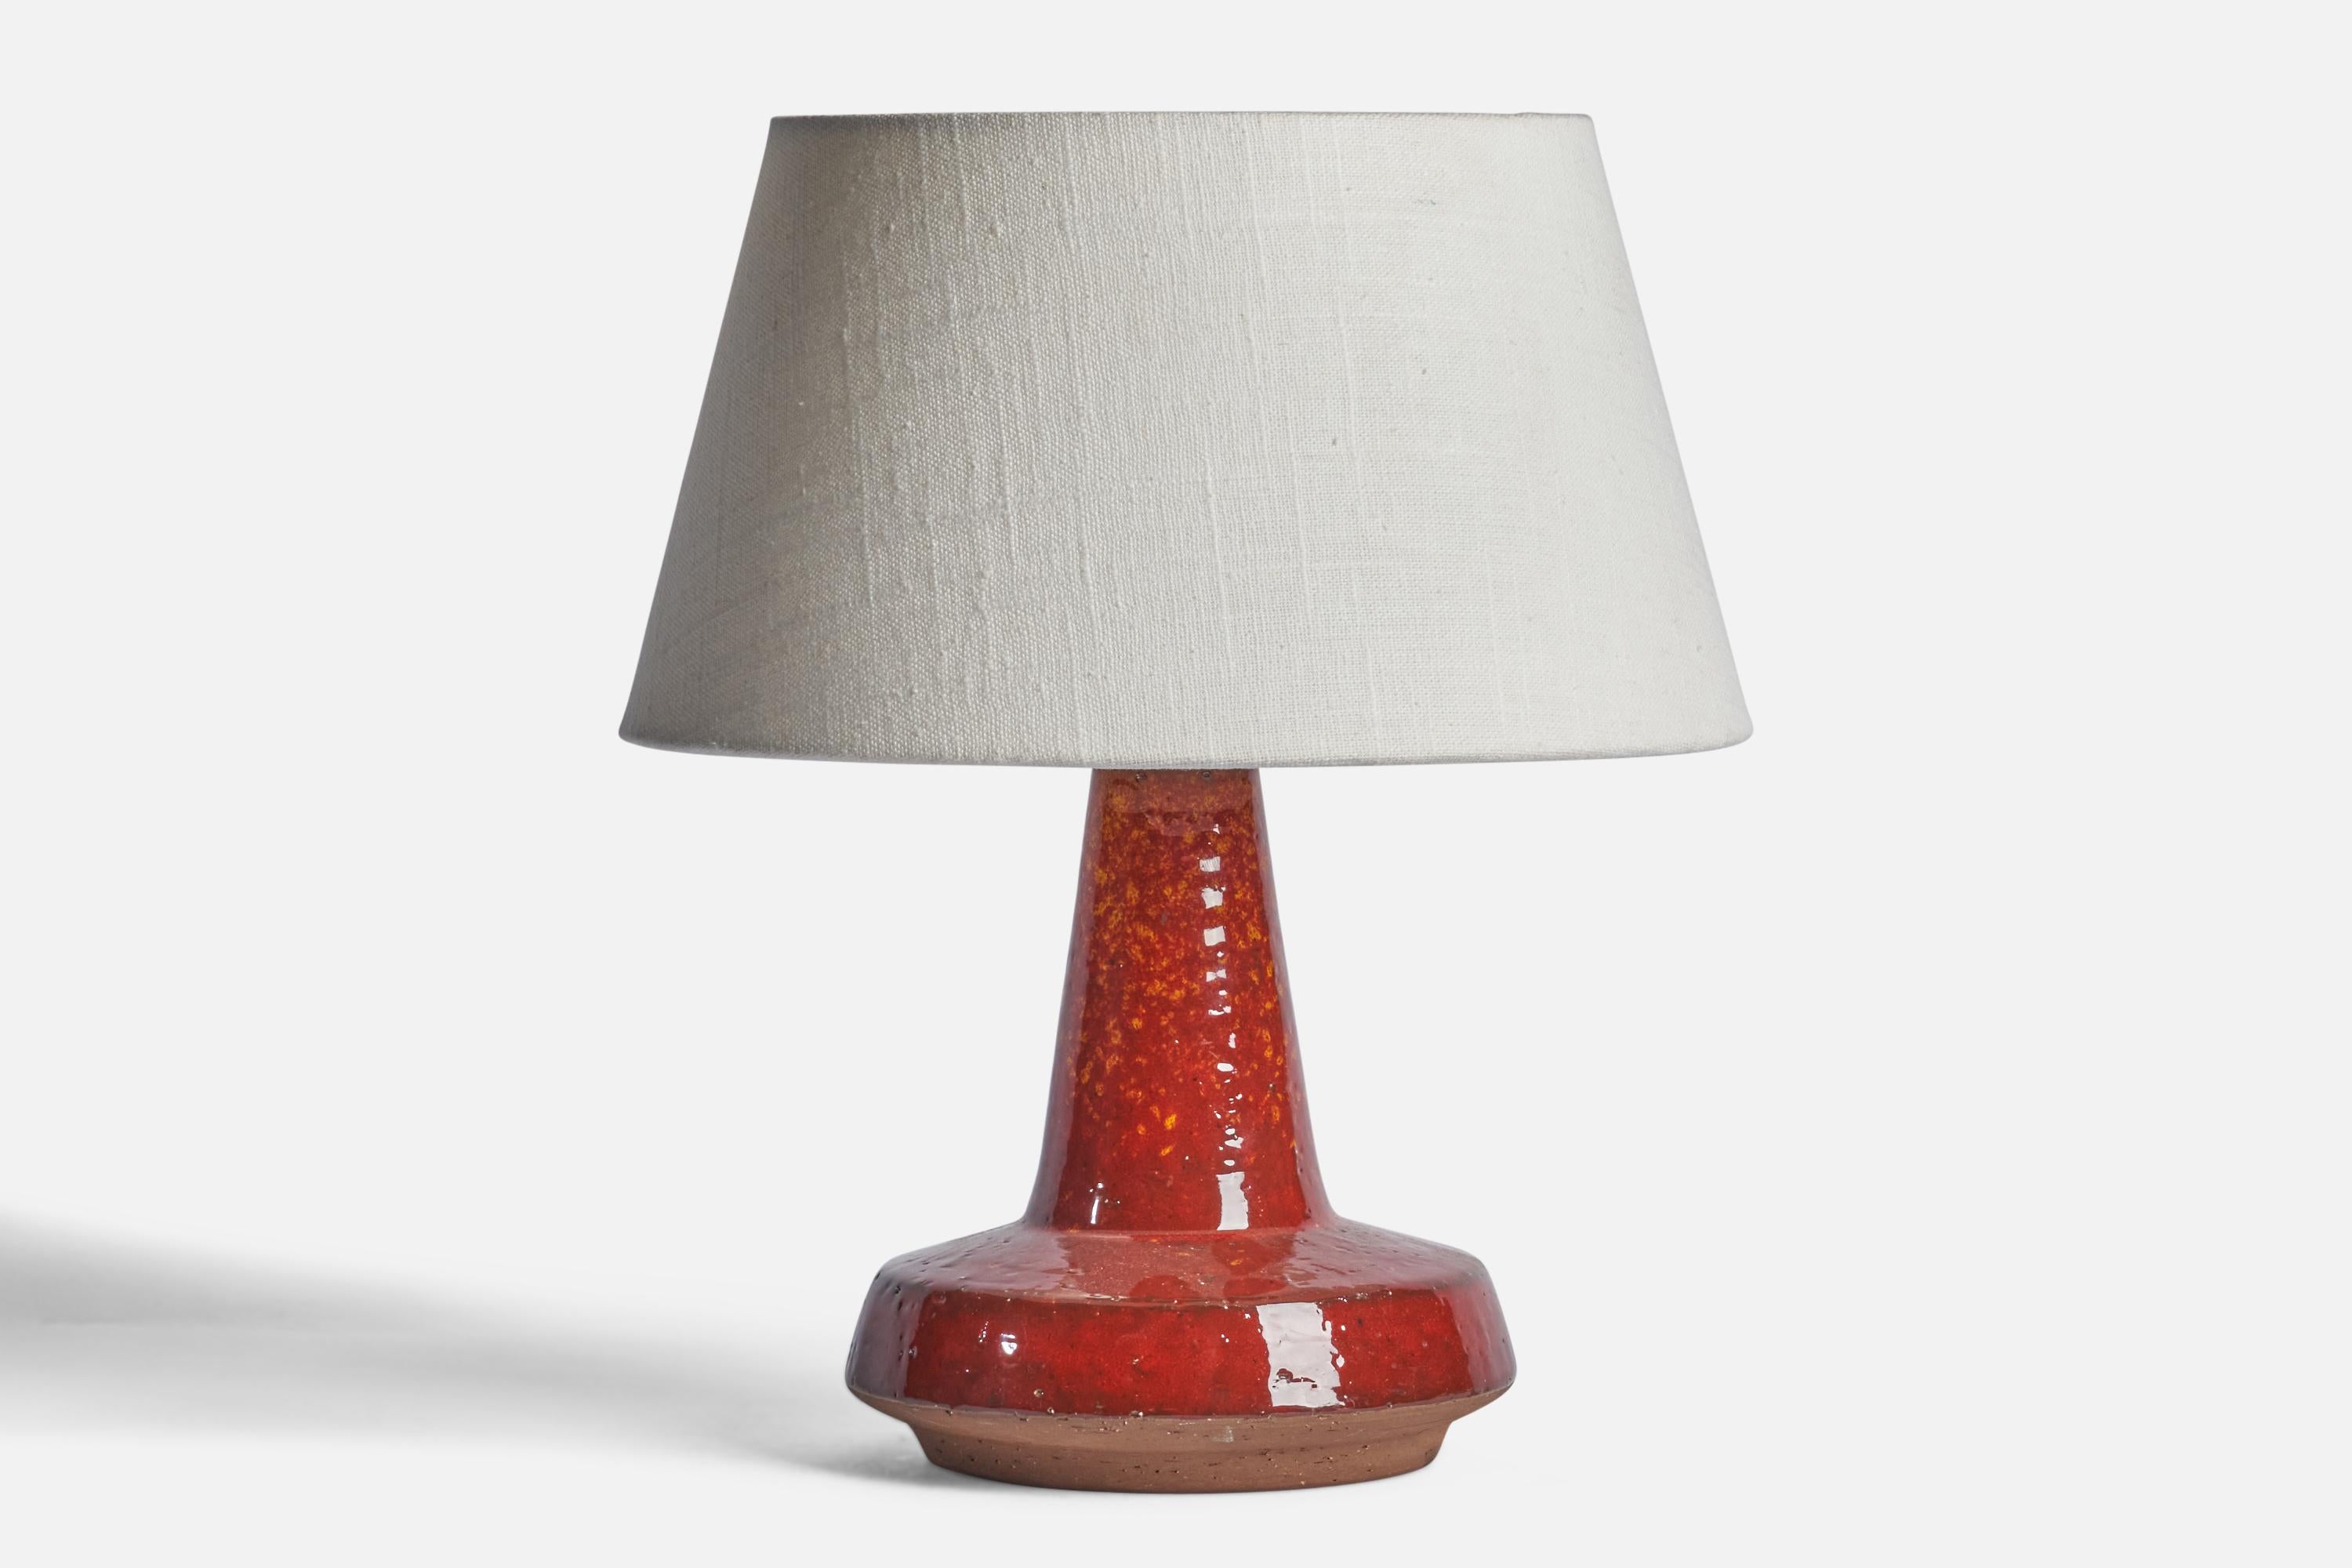 
A red-glazed stoneware table lamp designed and produced by Michael Andersen, Bornholm, Denmark, c. 1960s.
Dimensions of Lamp (inches): 9” H x 5.5